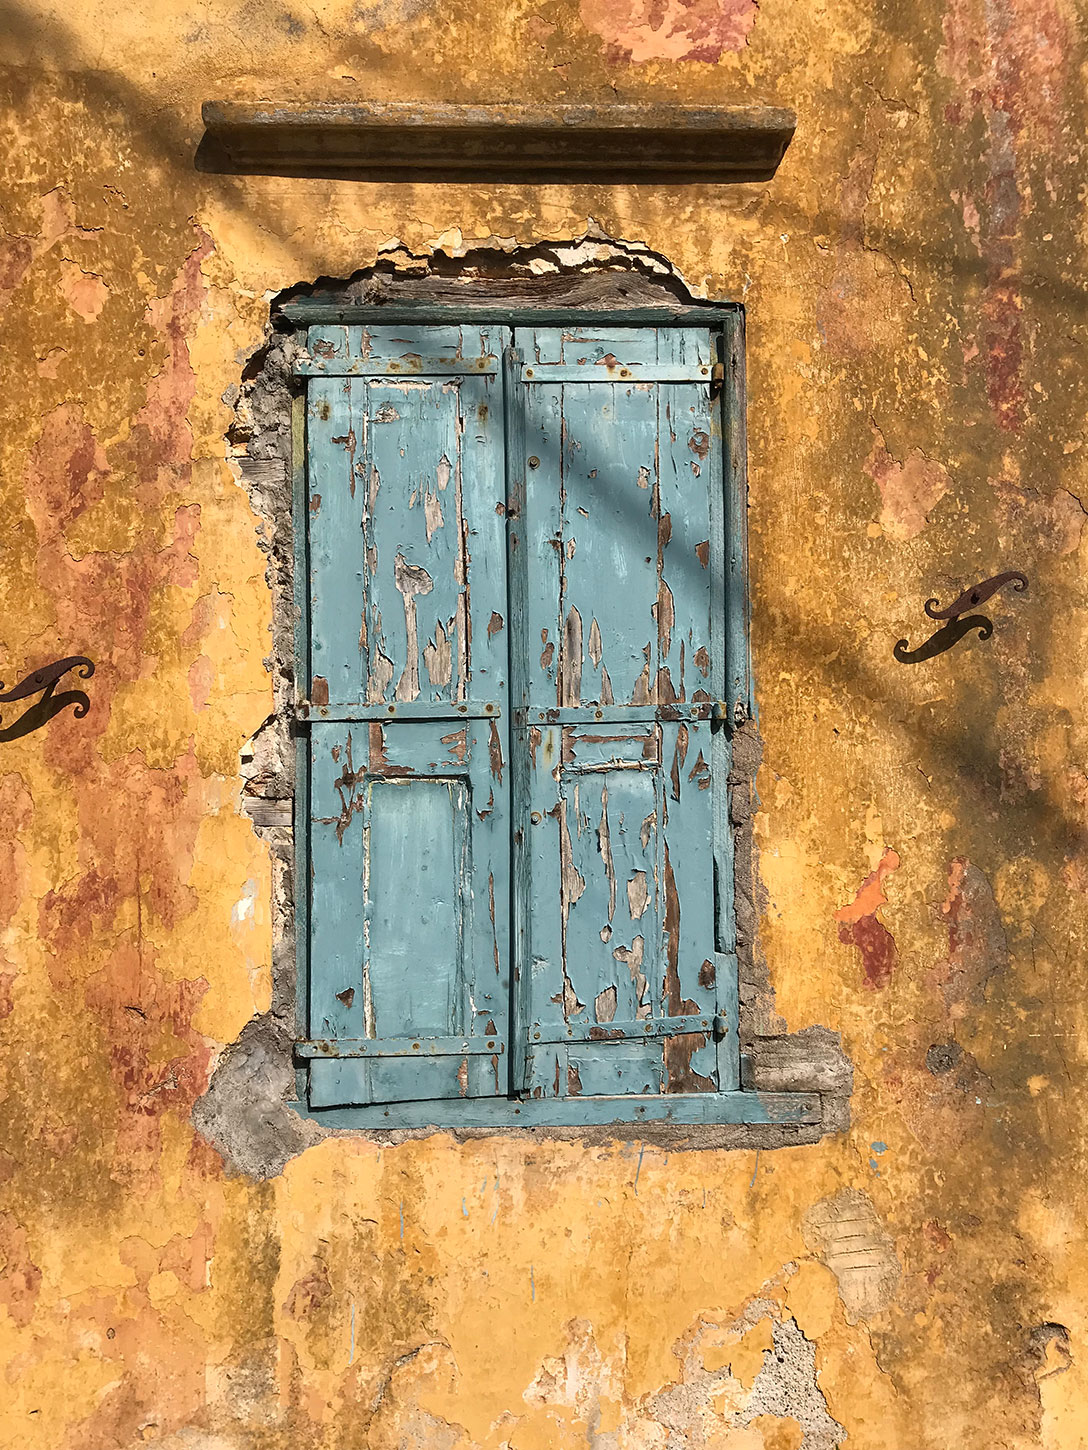 Symi Kali Strata. Amazing contrast of colors. Old wooden teal window on a golden wall.